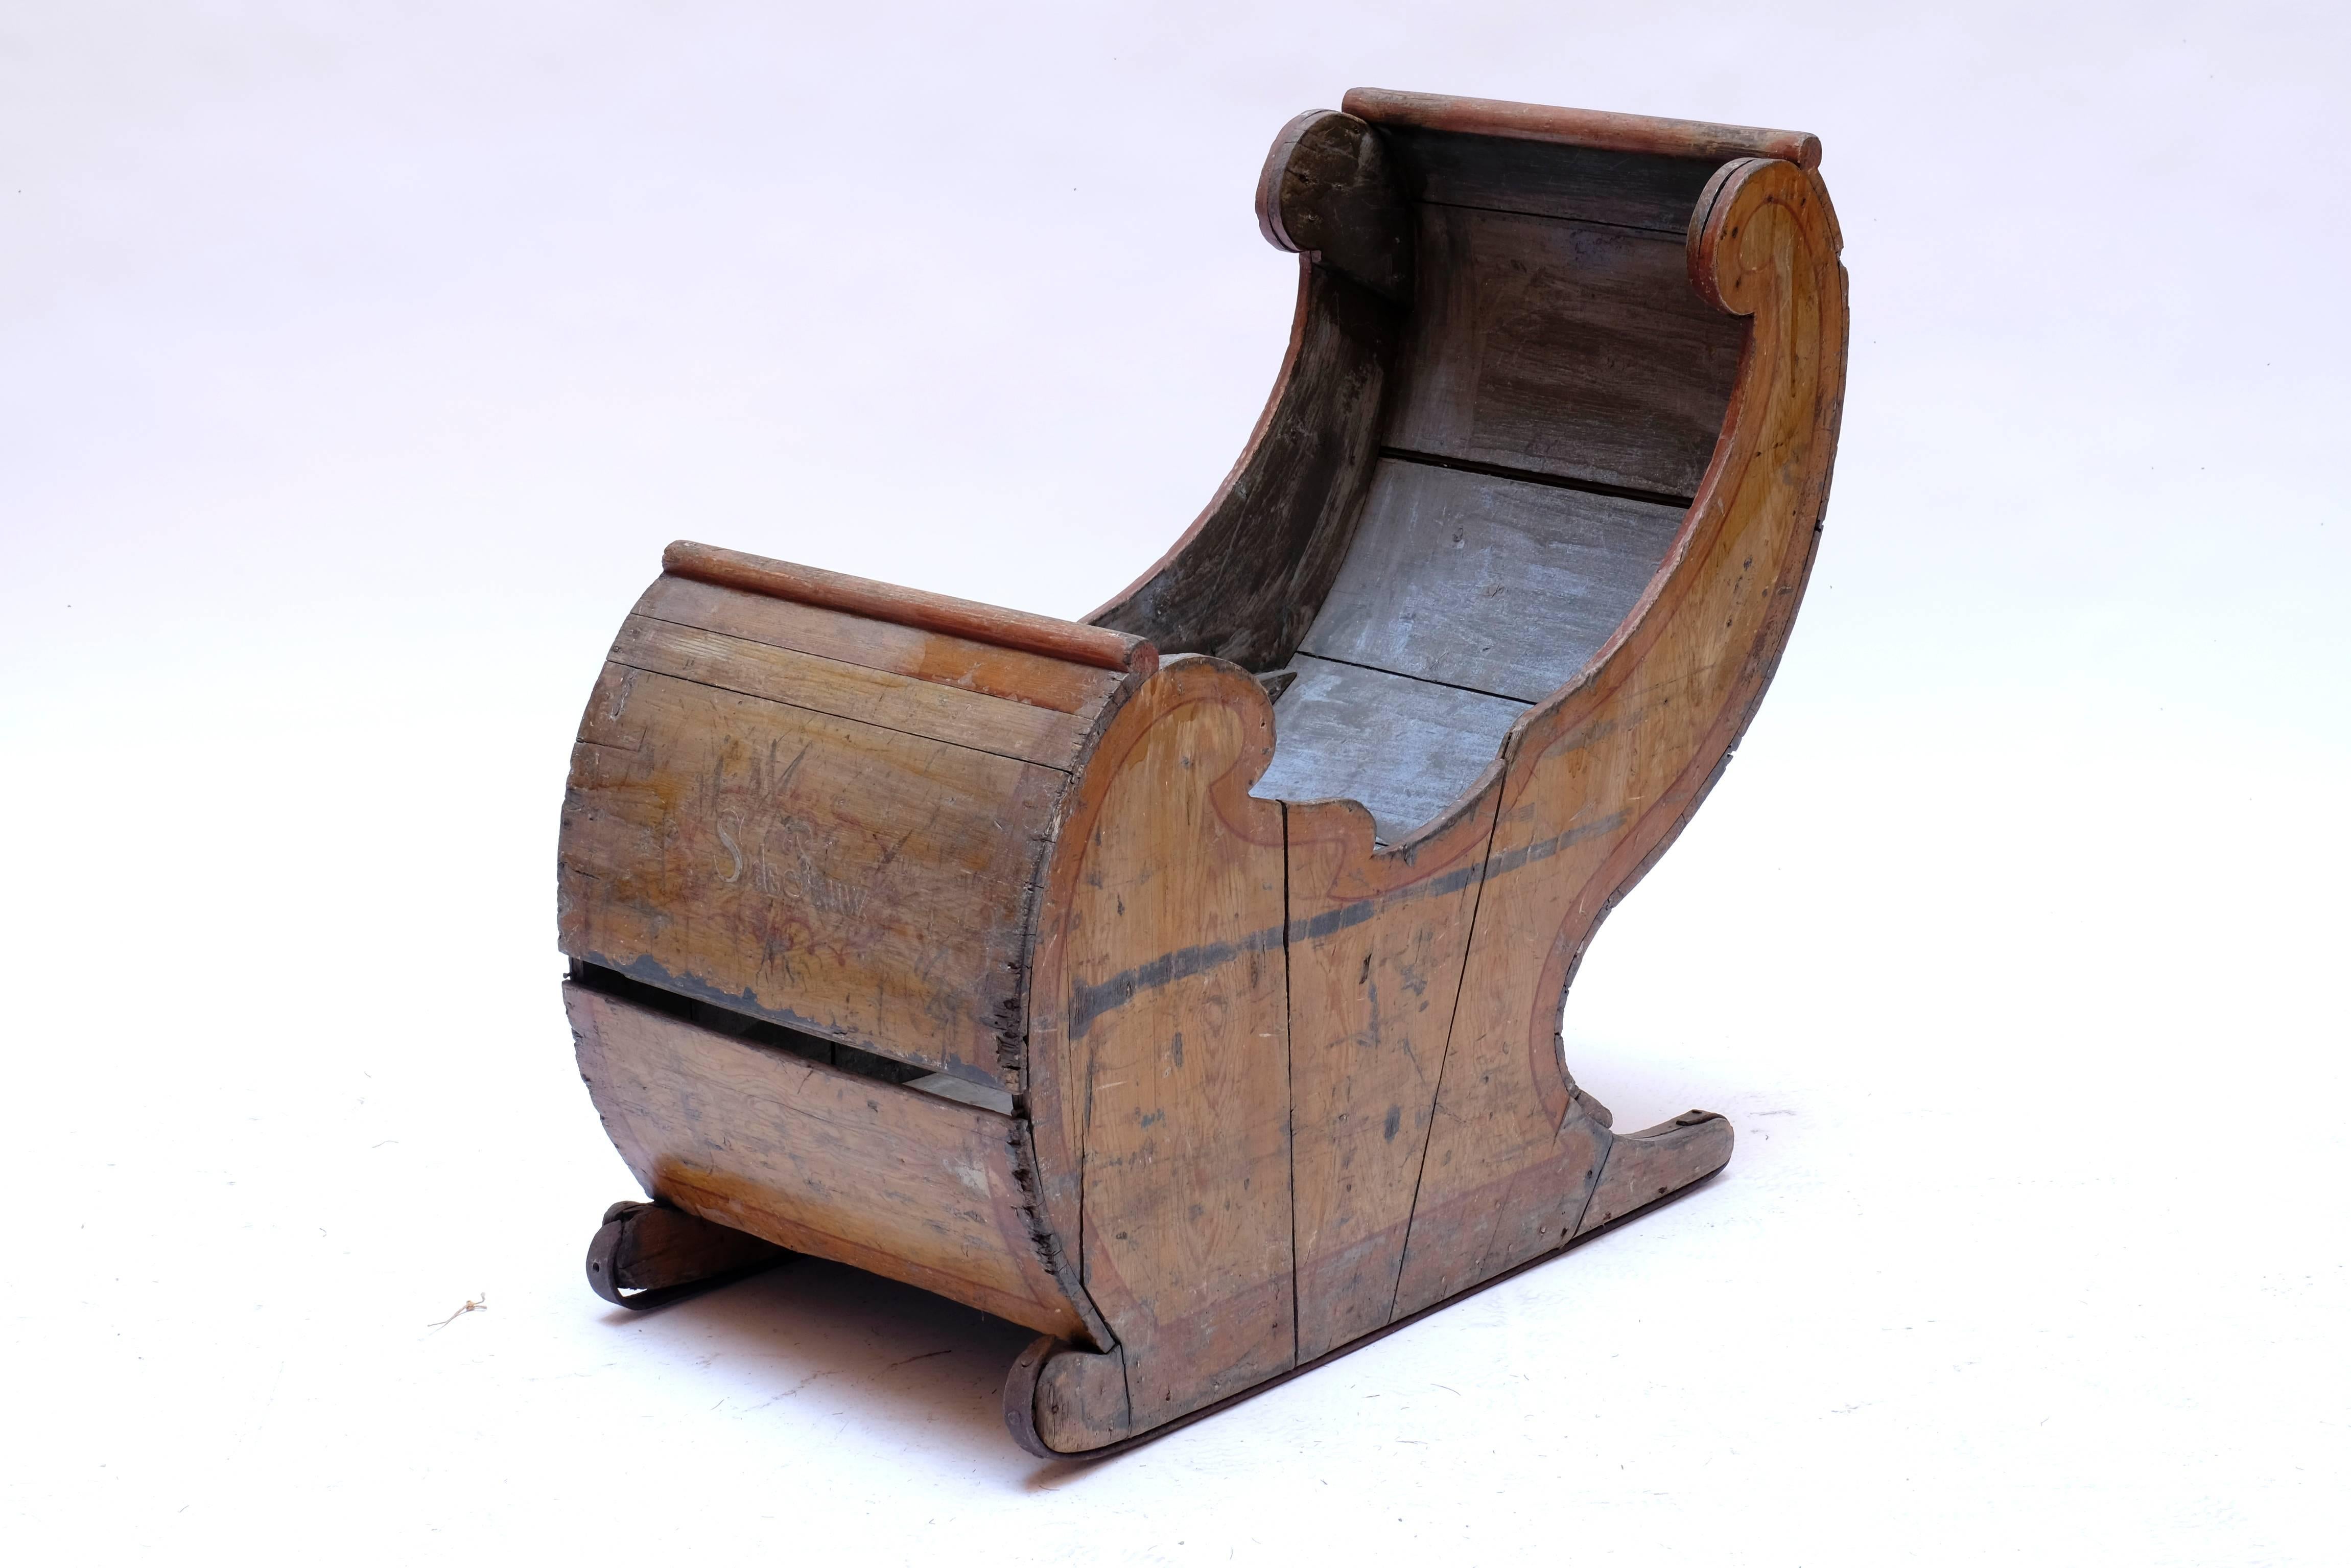 Antique sled made in painted wood and iron.